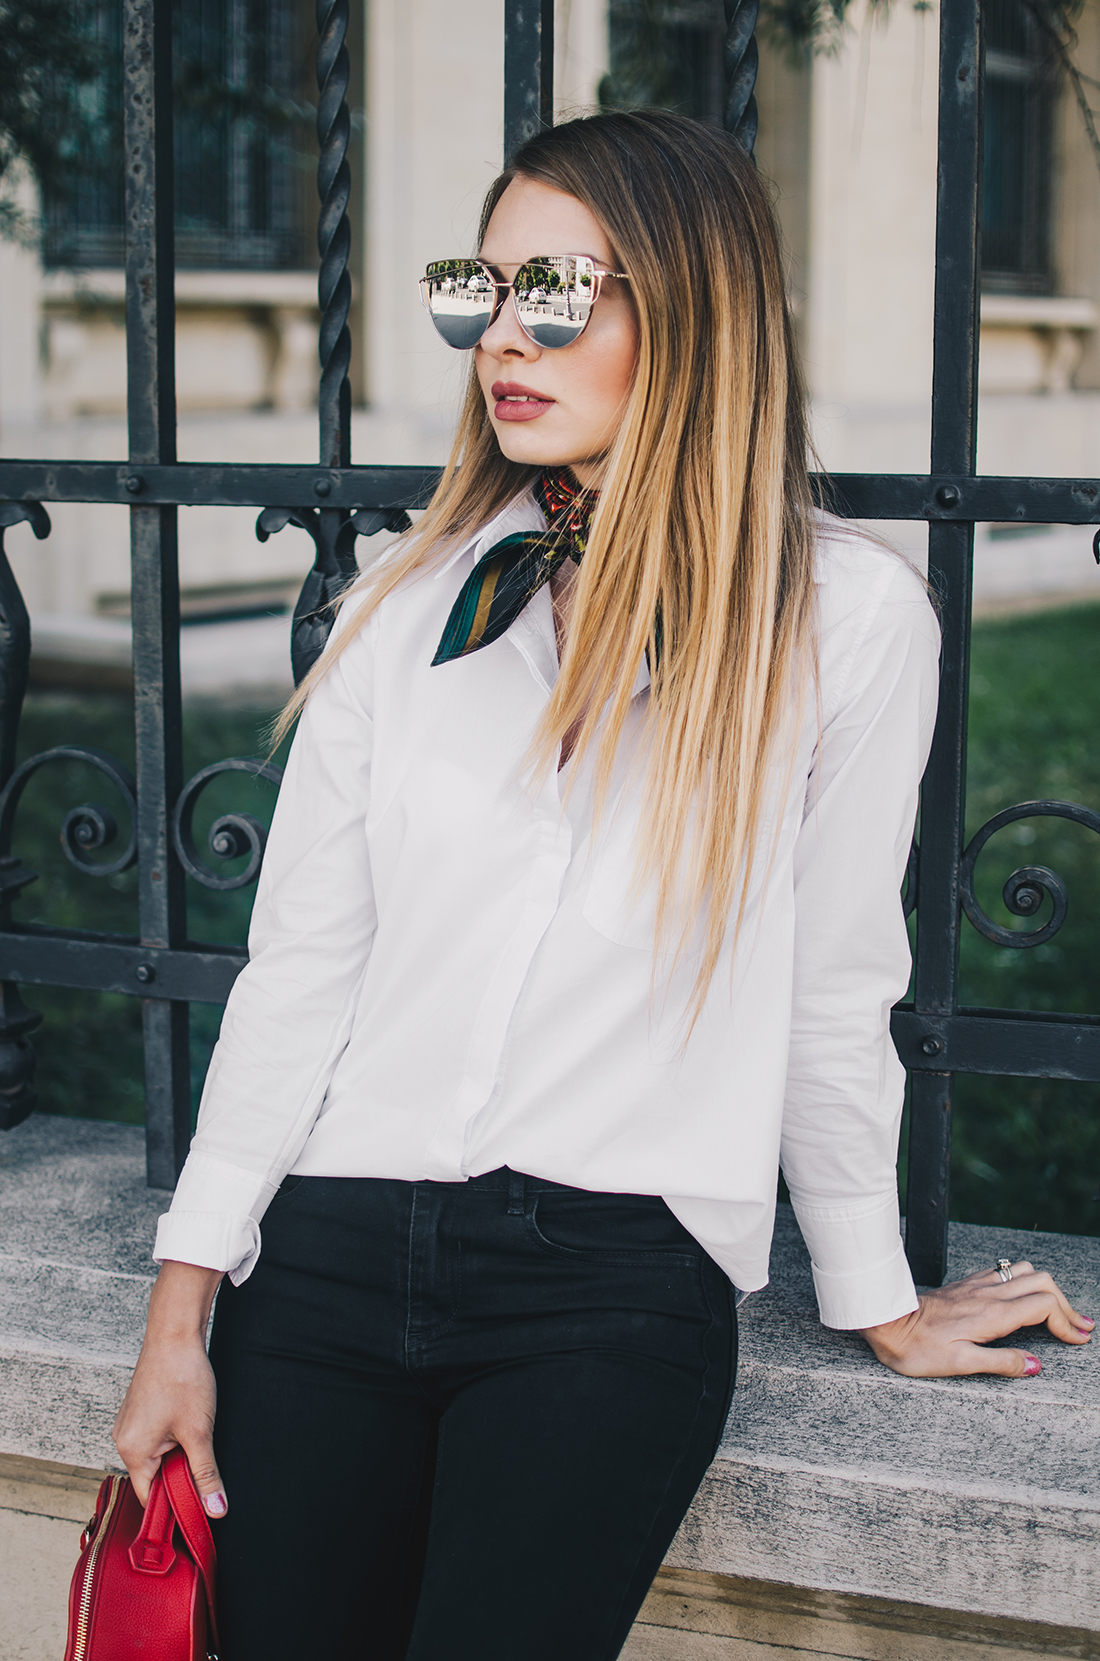 black-and-white-outfit-zerouv-sunglasses-red-bag-vintage-scarf-11